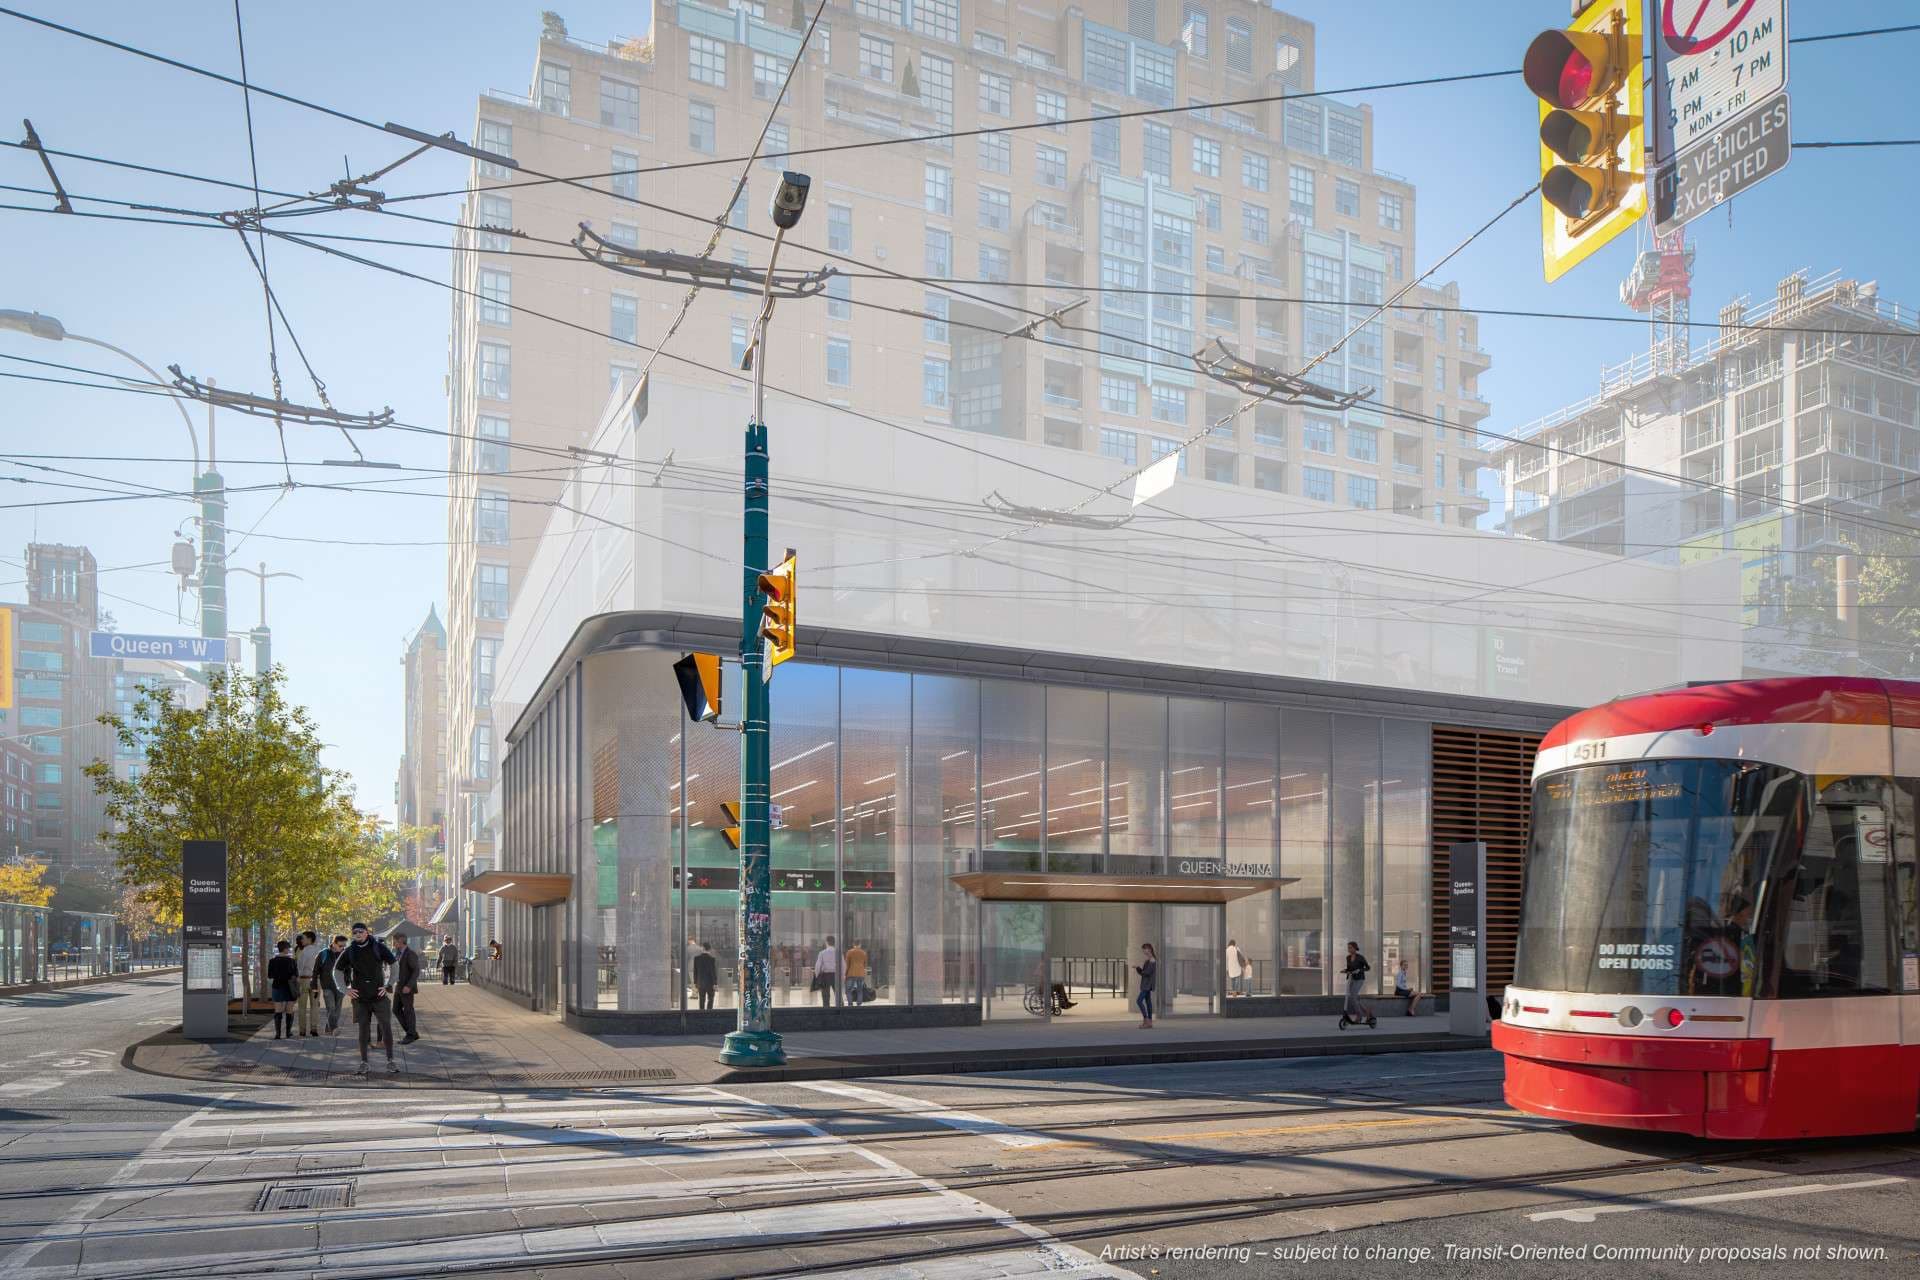 An image of the future Queen Spadina Station on the upcoming Ontario Line